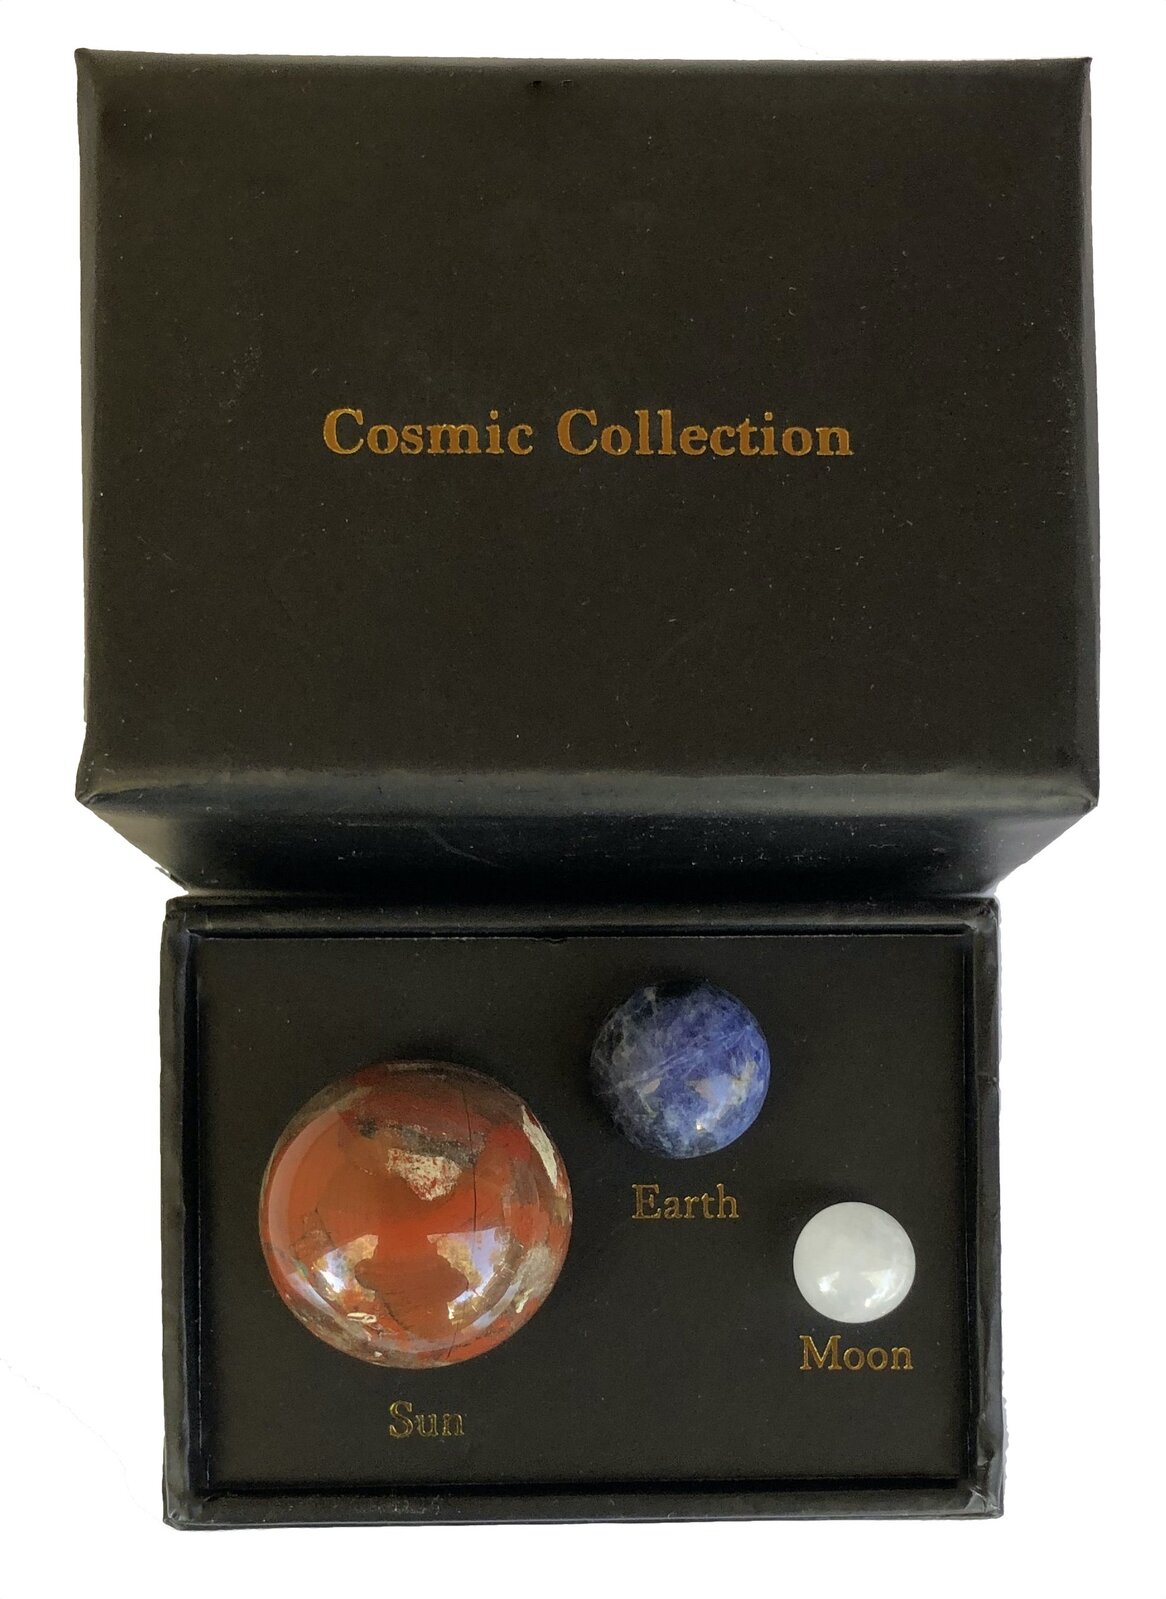 Cosmic Collection image